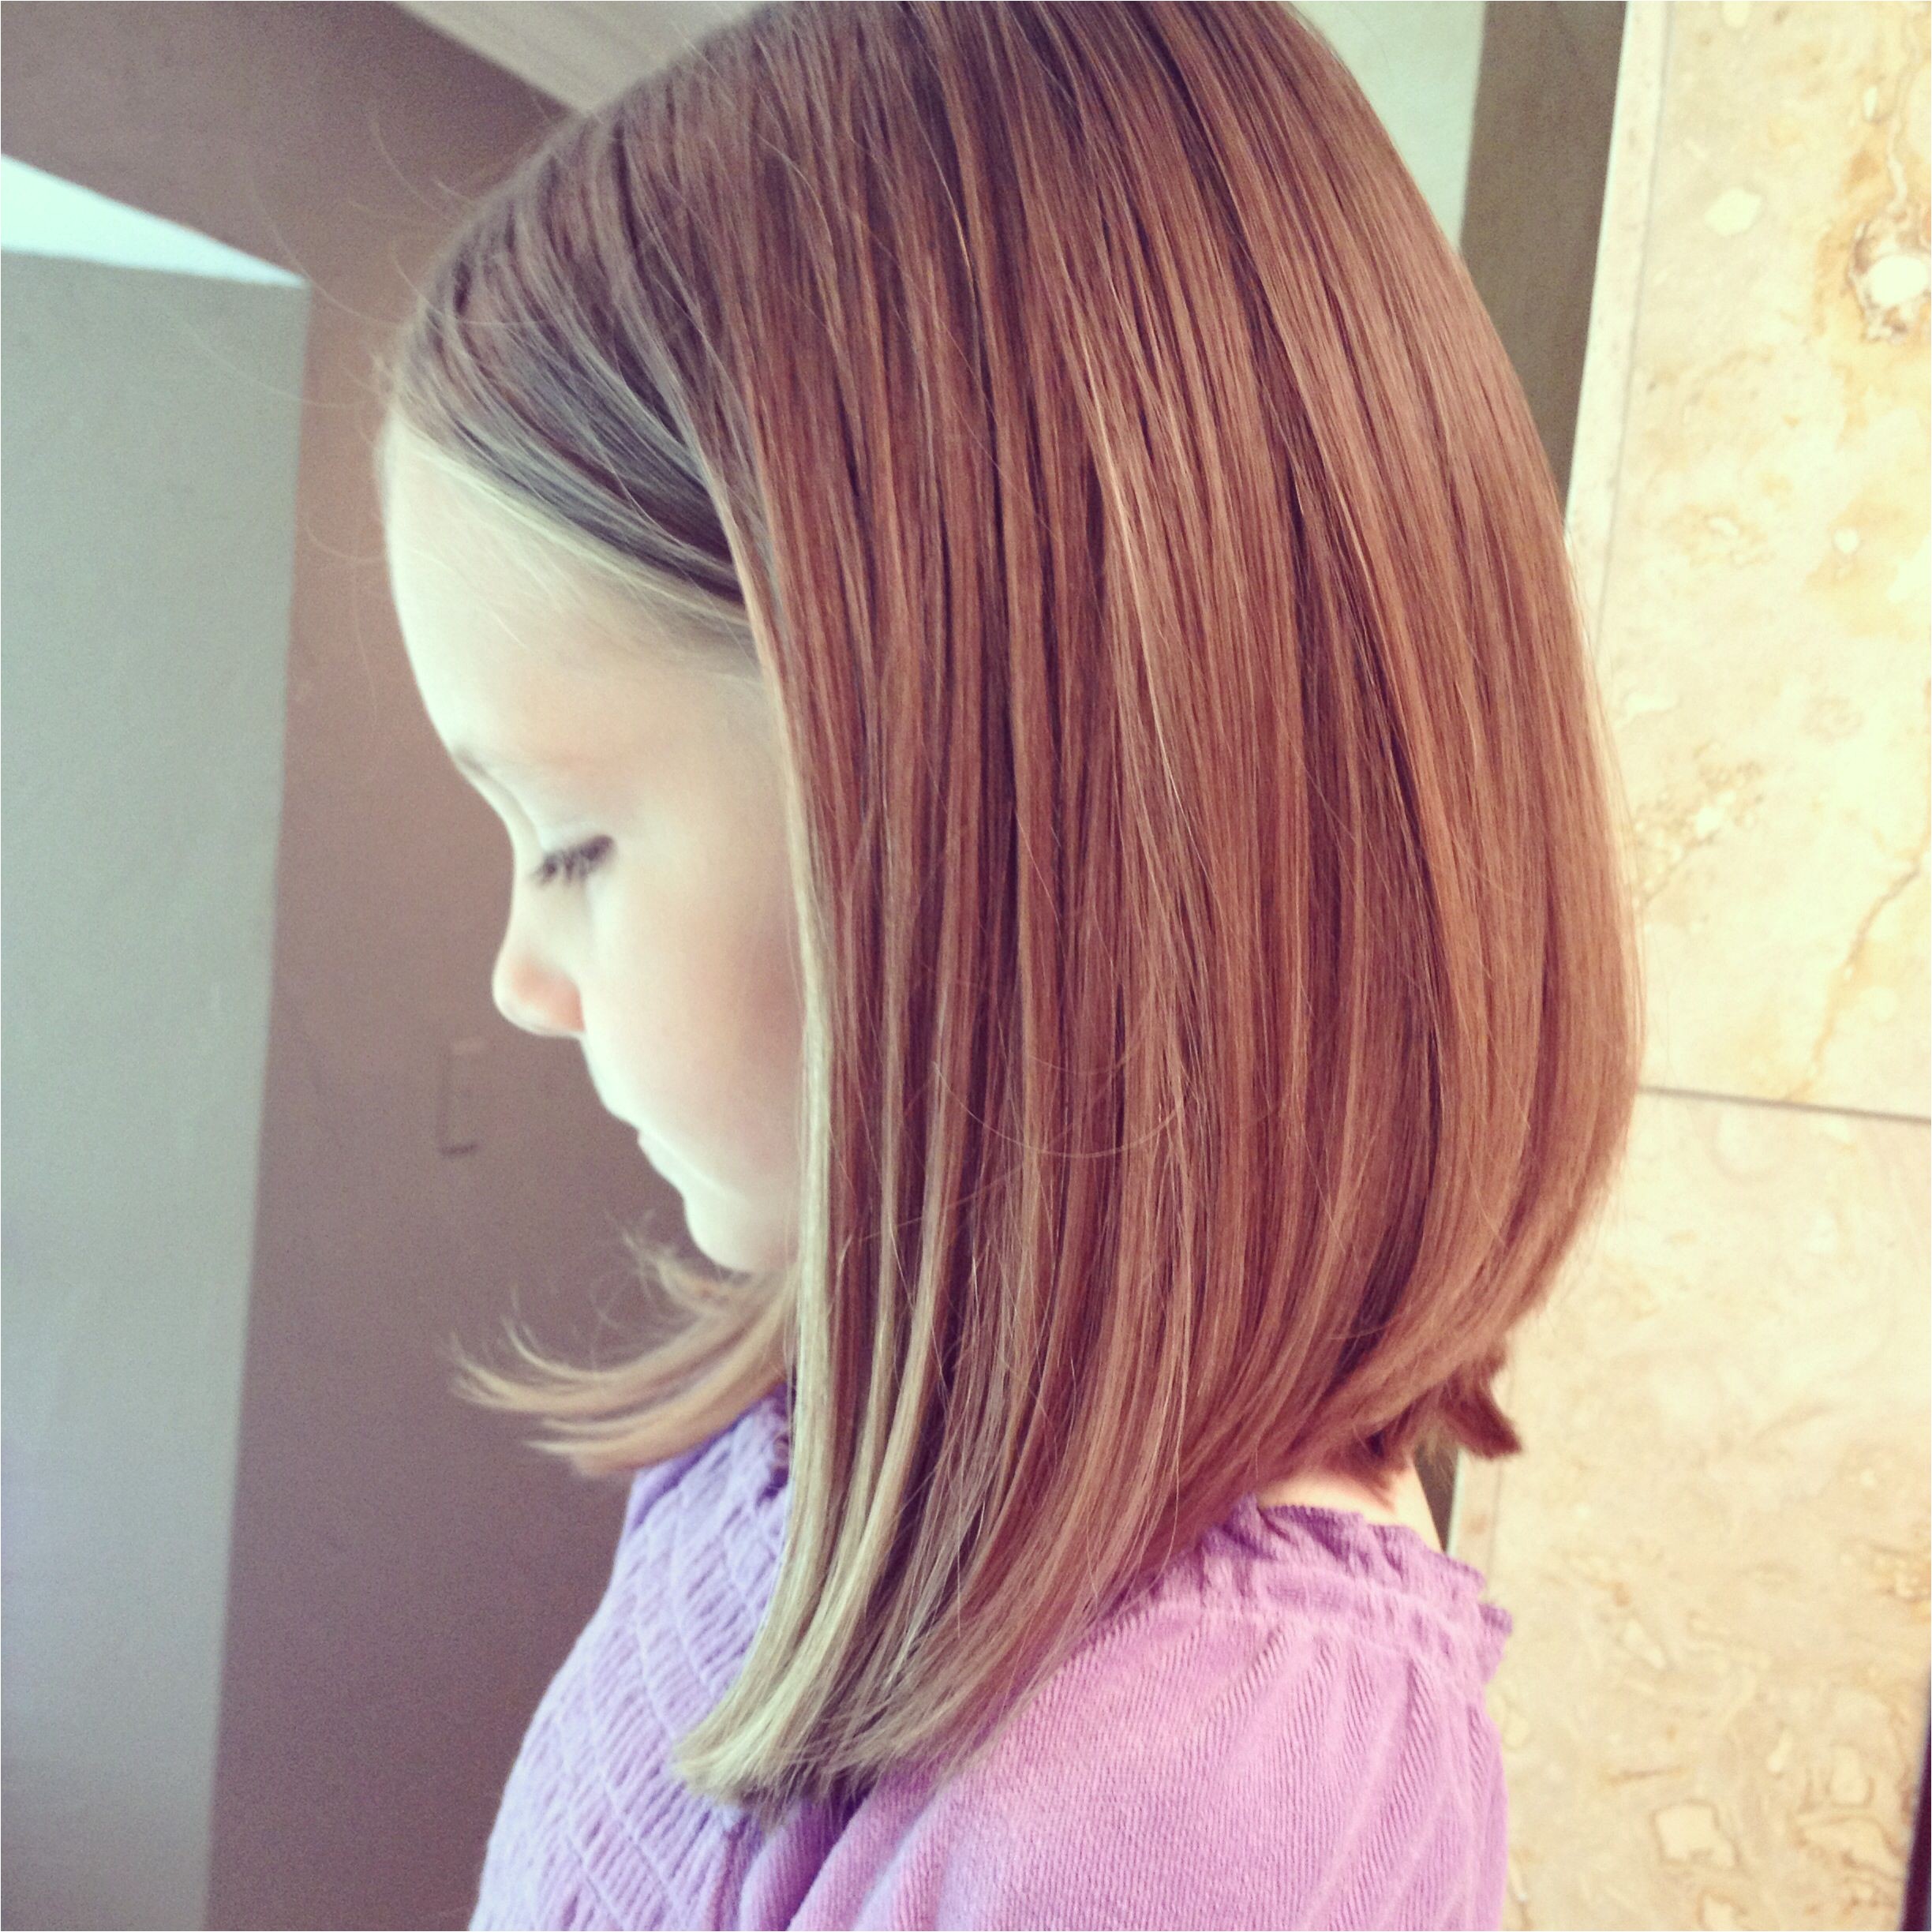 13 Year Old Hairstyles for Girls 9 Best and Cute Bob Haircuts for Kids Kids Haircuts